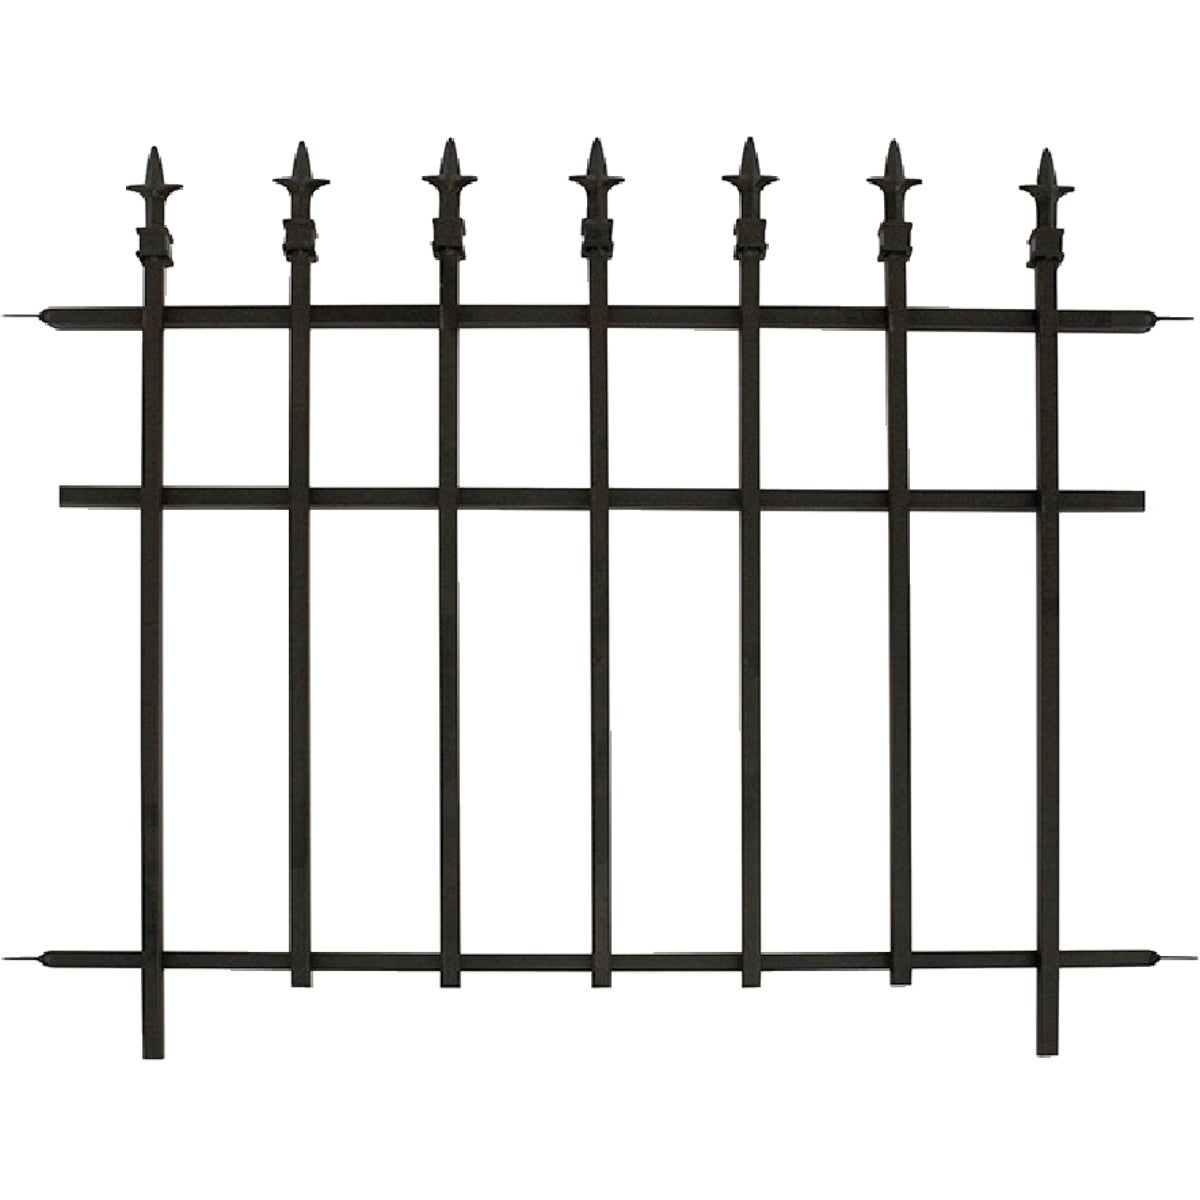 Item 702666, Classic finial decorative sectional fence.